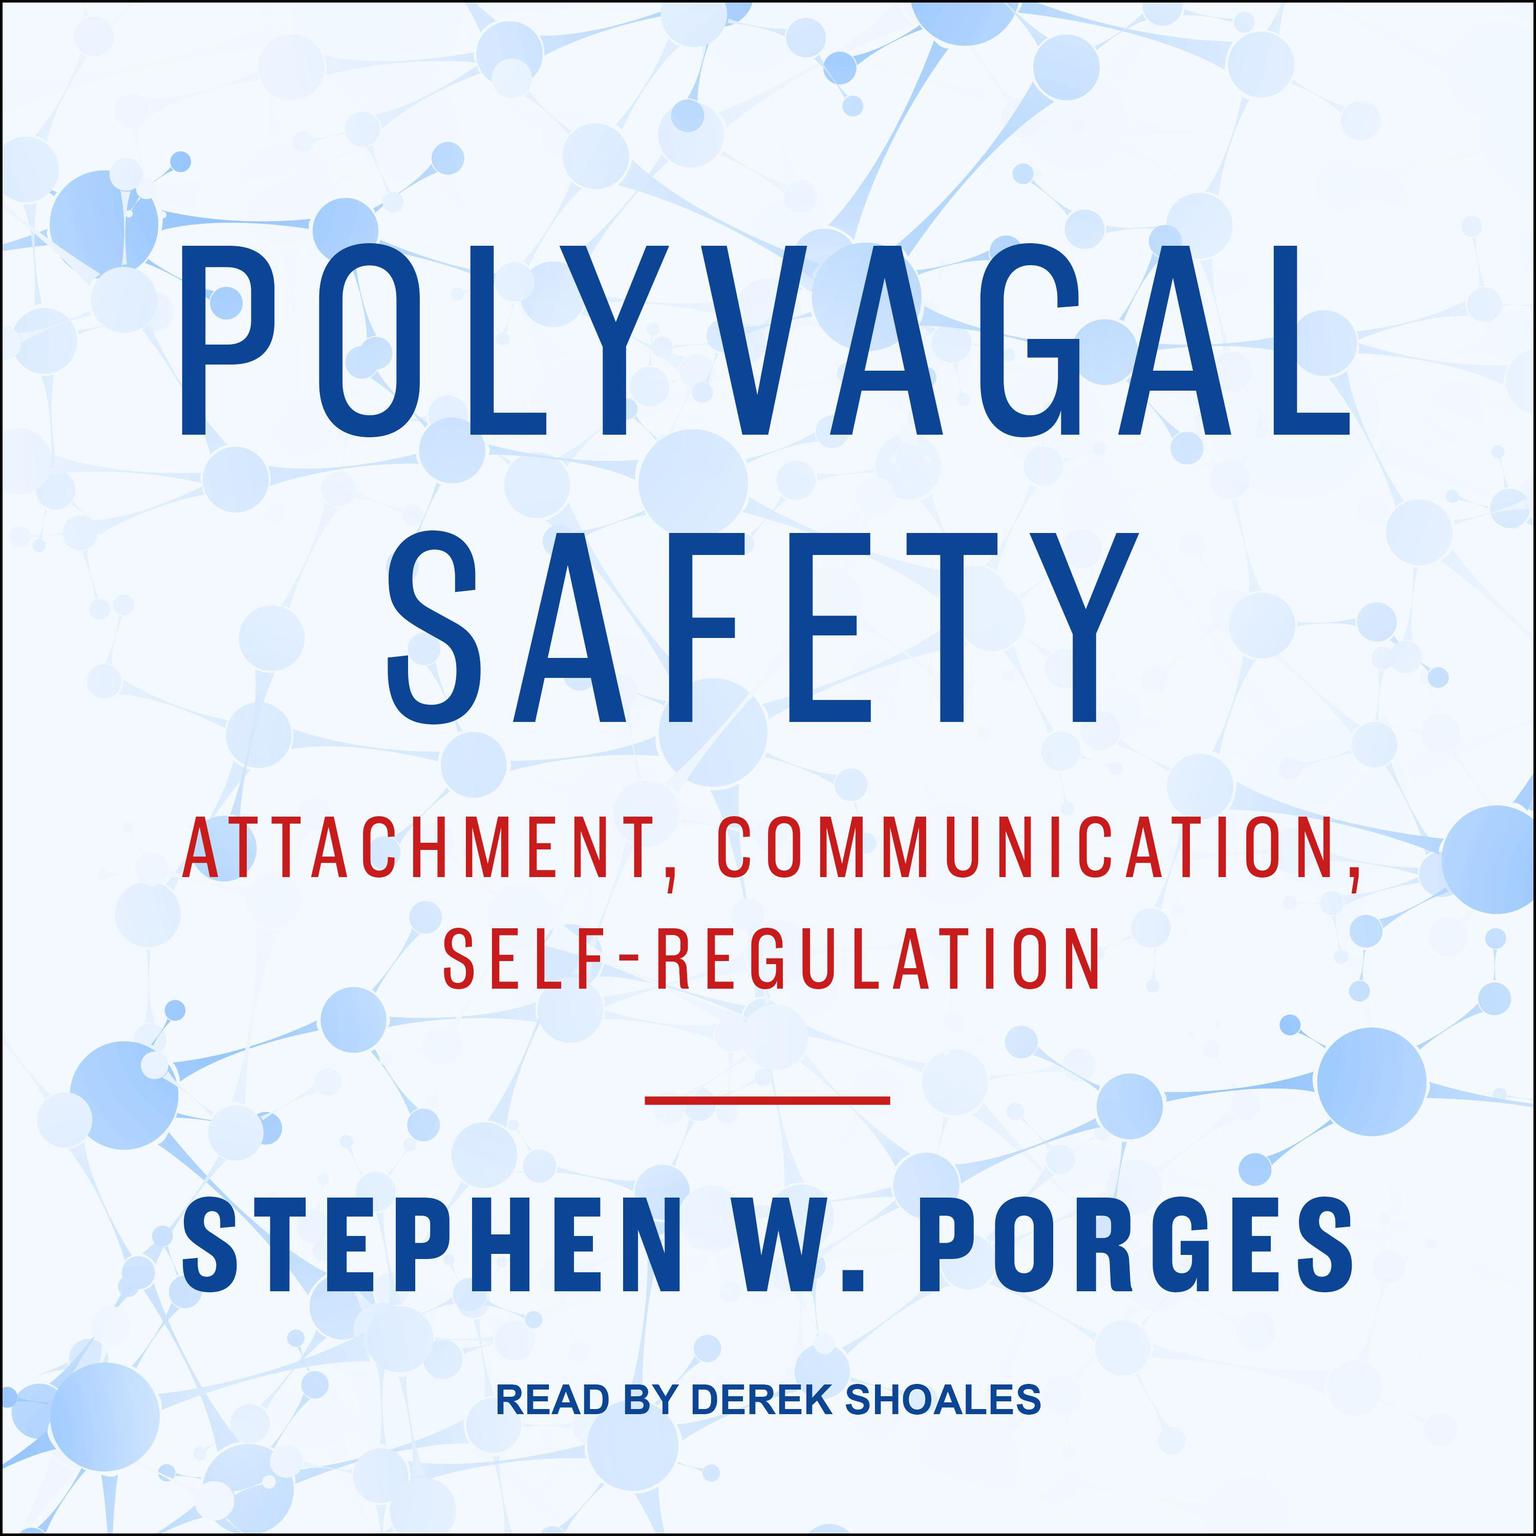 Polyvagal Safety: Attachment, Communication, Self-Regulation Audiobook, by Stephen W. Porges